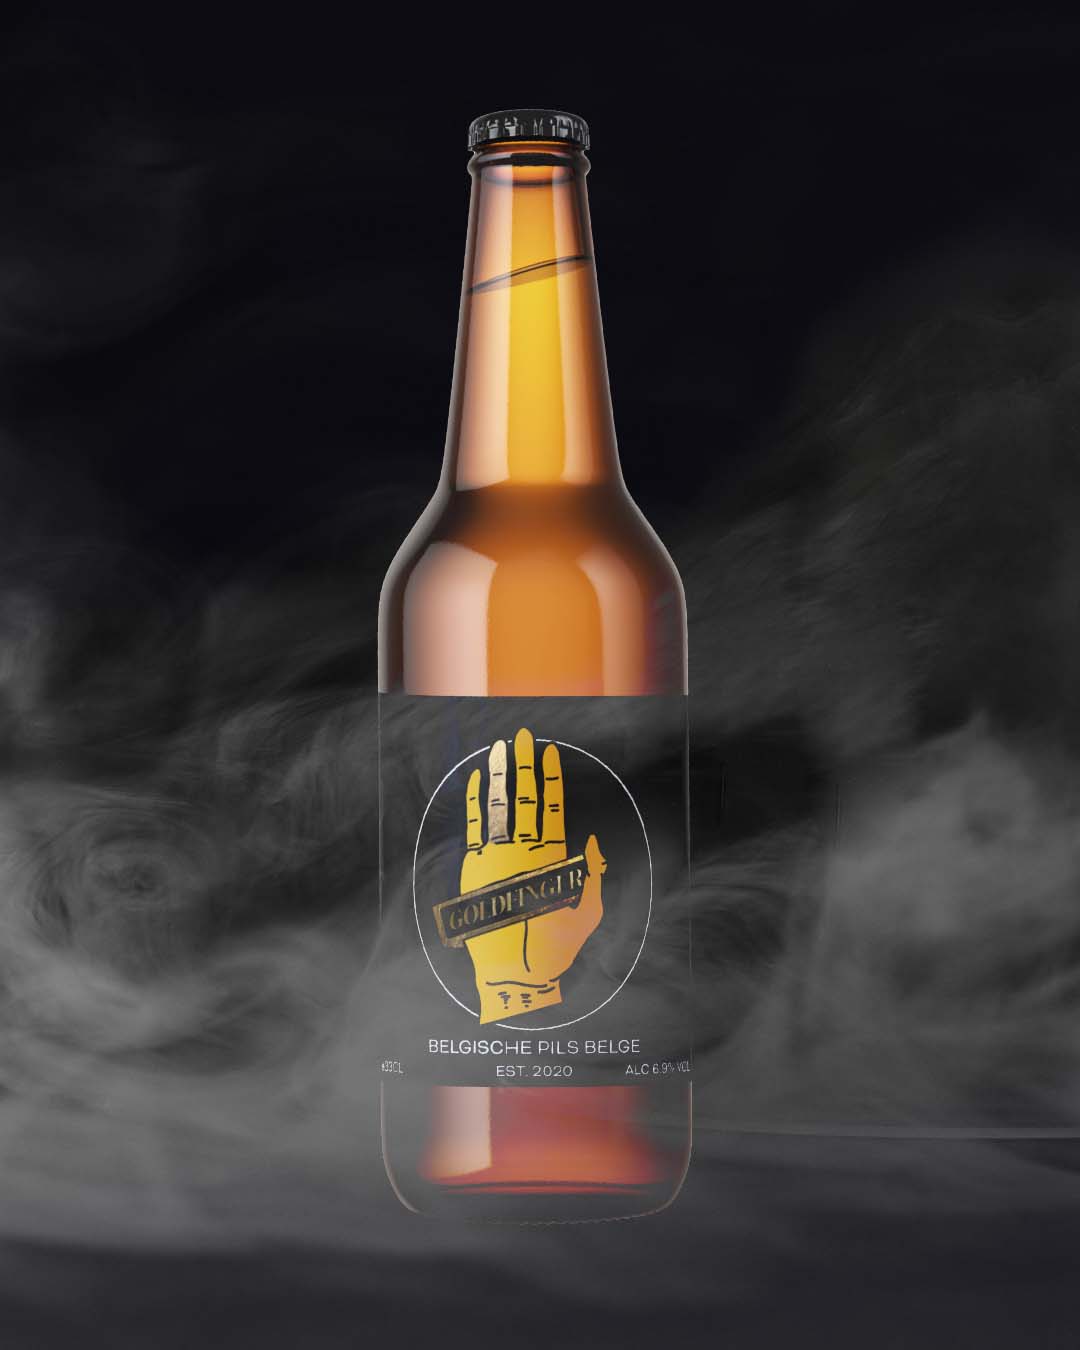 Goldfinger beer label by NP Creative